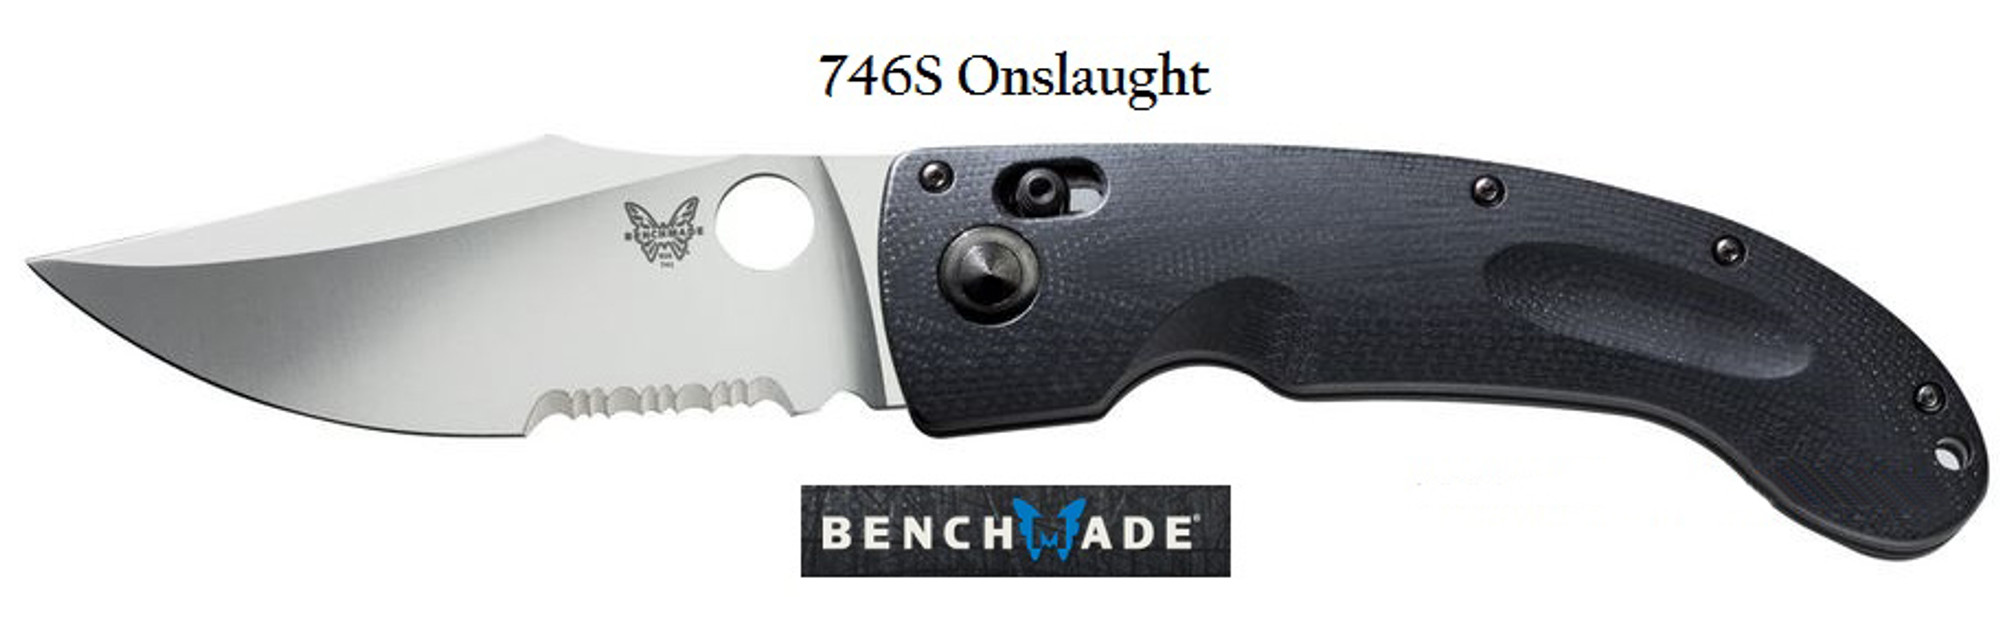 Benchmade 746S Mini-Onslaught Satin Blade Serrated